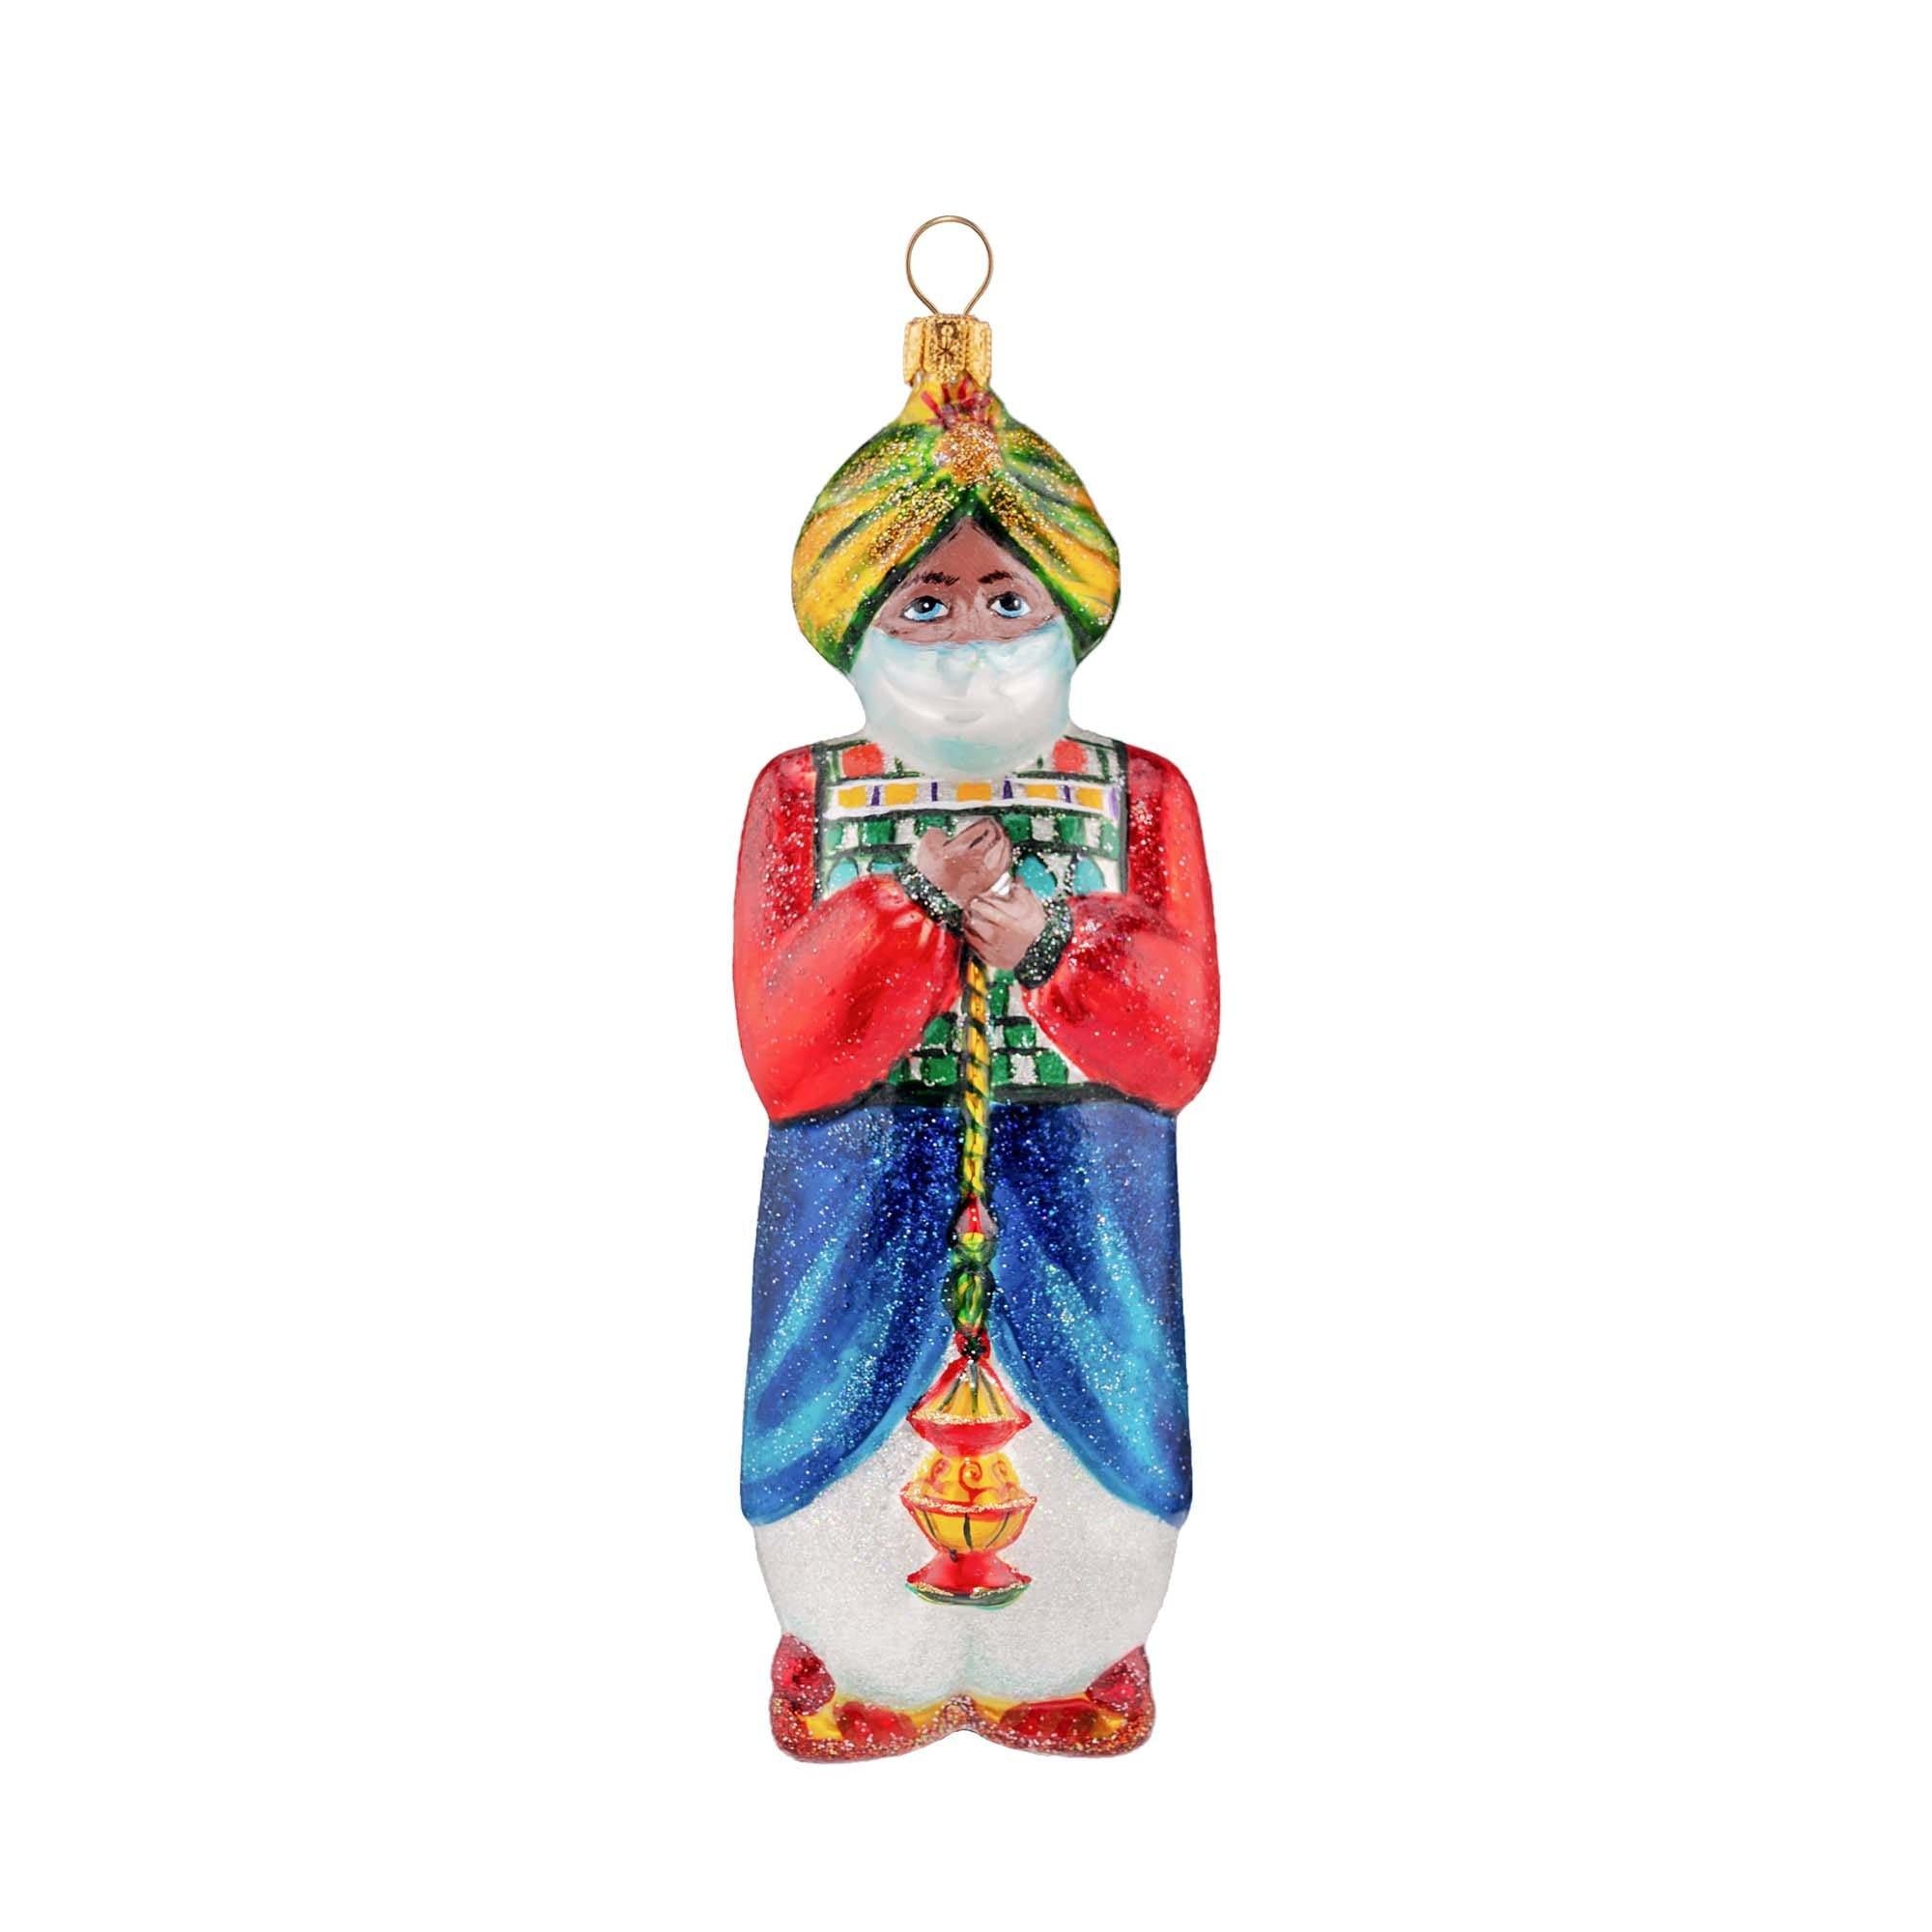 Wise man with frankincense - Mysteria Christmas Ornaments